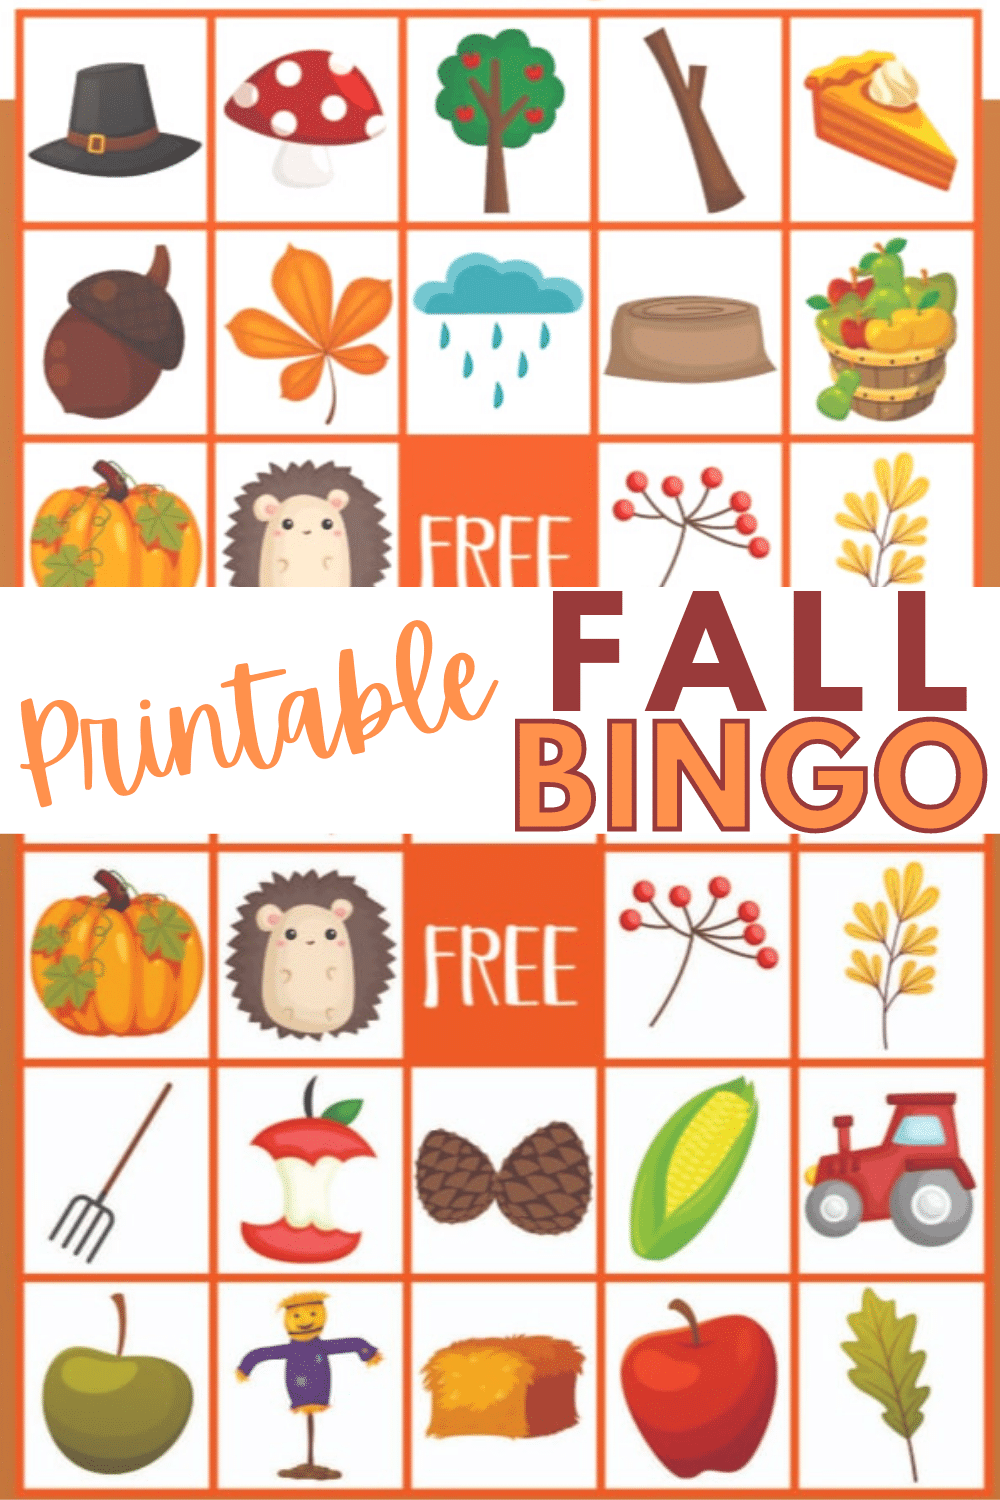 Printable Fall Bingo is a great activity for kids during the autumn months. This game is perfect for fall birthday parties or school parties. #printables #fall #bingo via @wondermomwannab